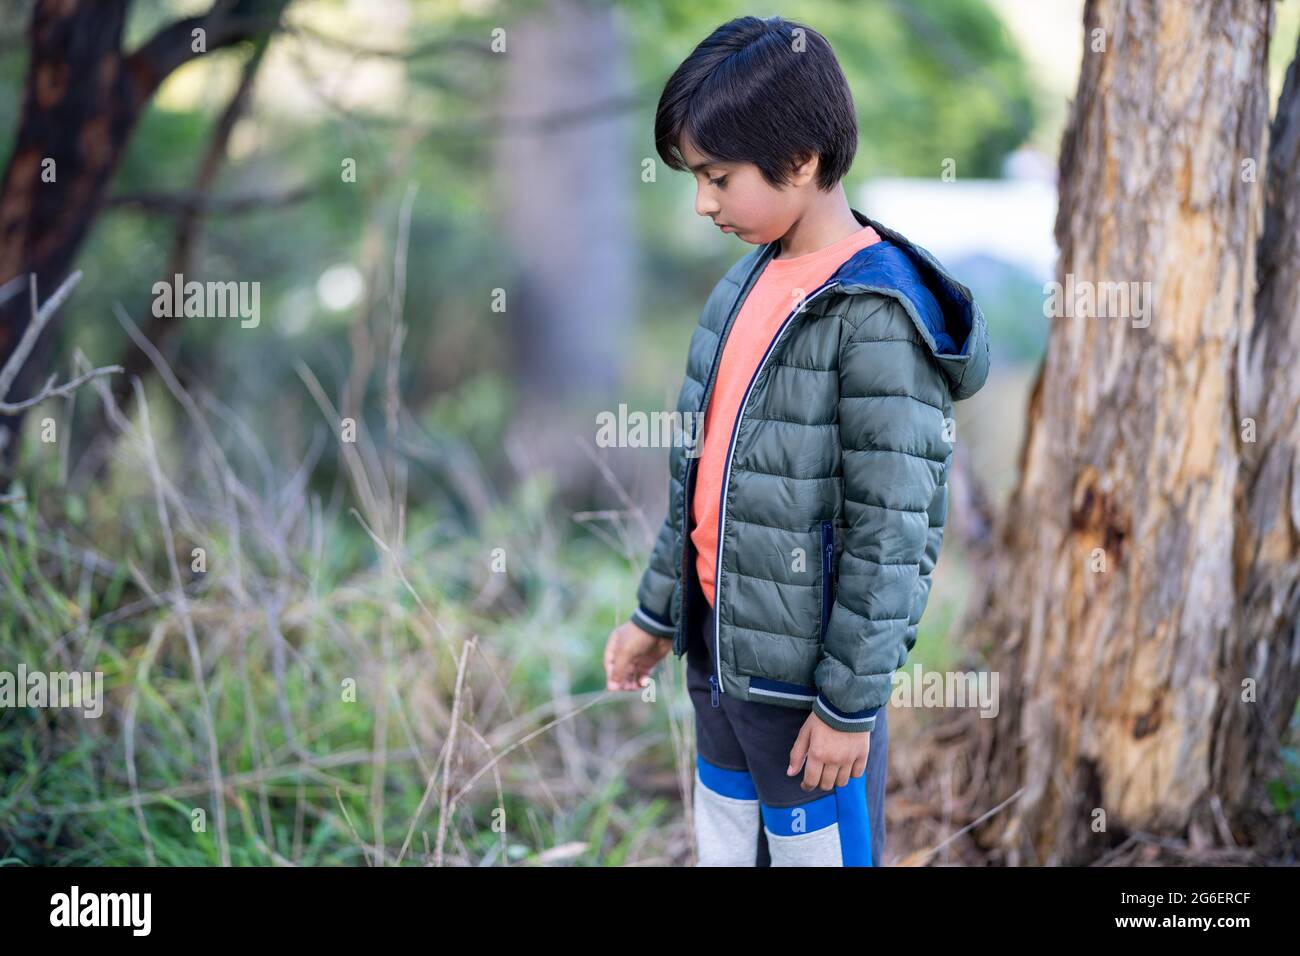 Lonely Young boy standing touching the grass. Portrait of child outdoors in natural light. Natural environment, loneliness. Stock Photo